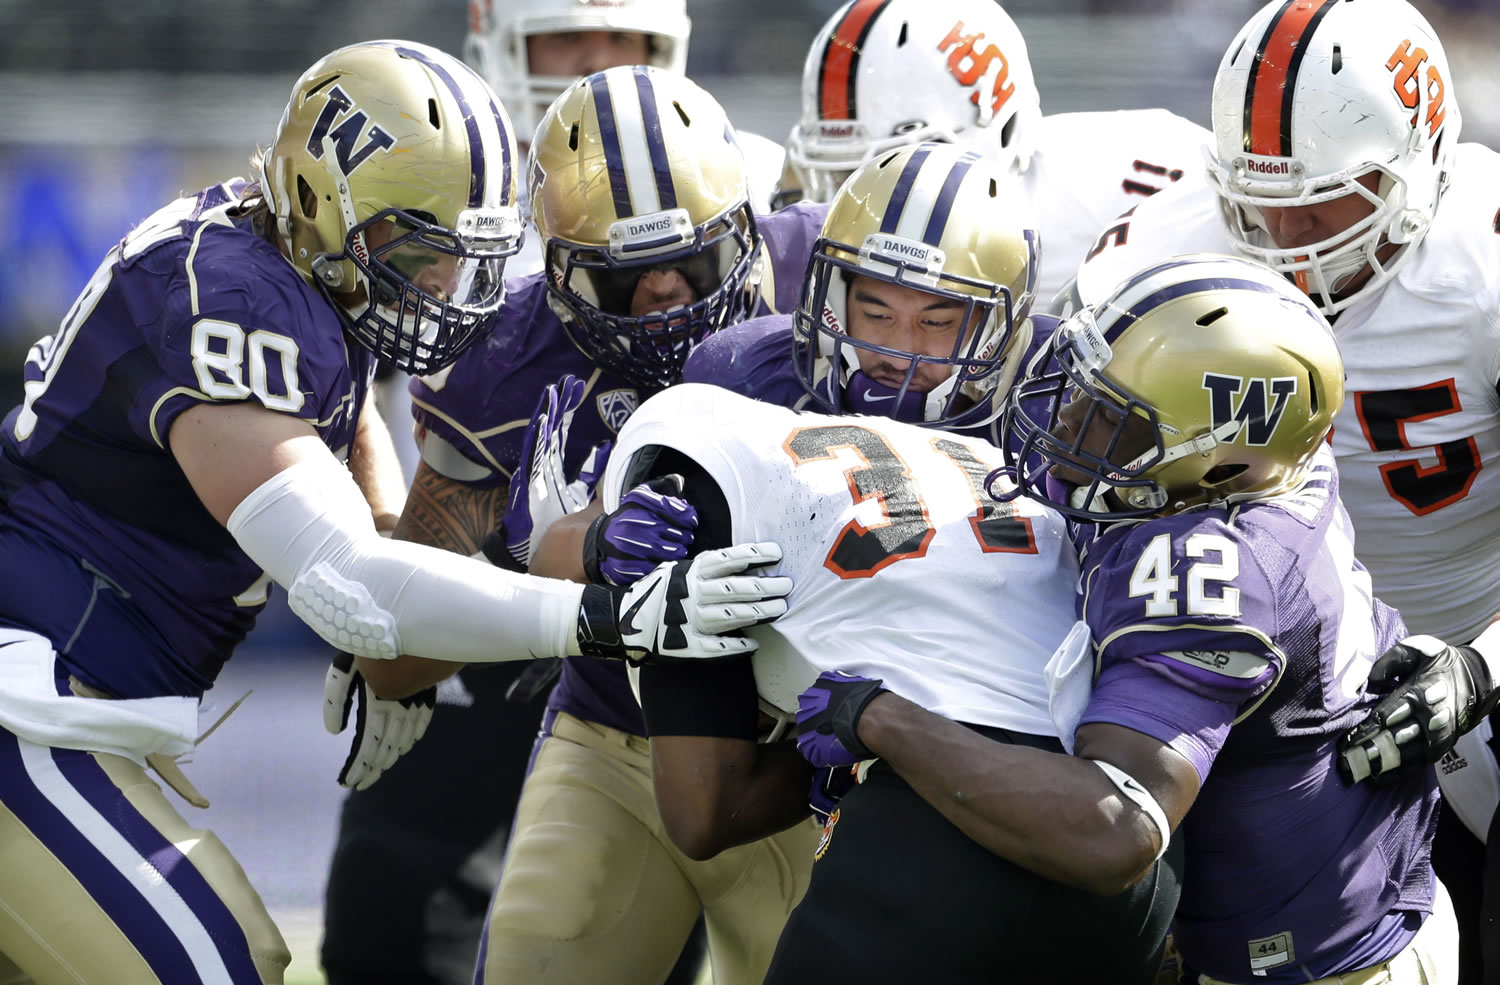 Four Washington defenders wrap up Idaho State's Xavier Finney in the first half Saturday at Husky Stadium.